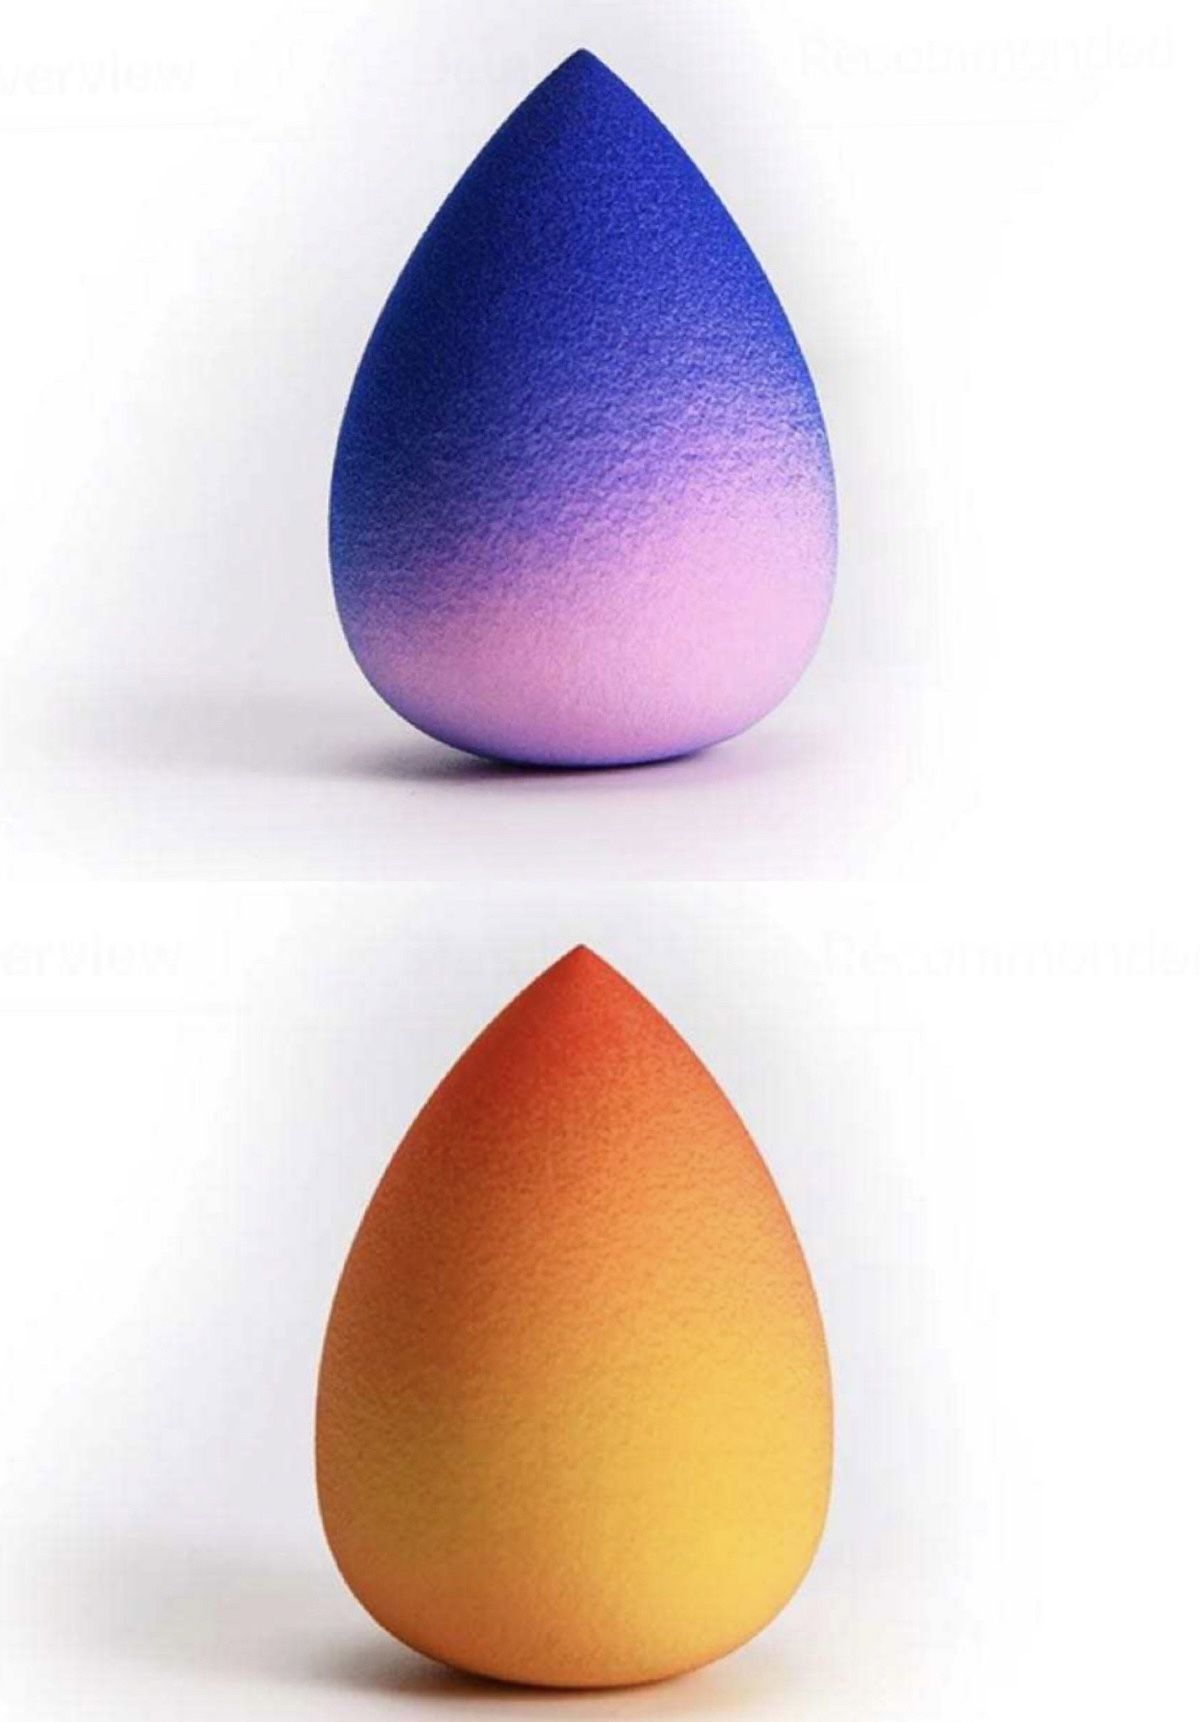 New Release Good Quality Material Beauty Blender